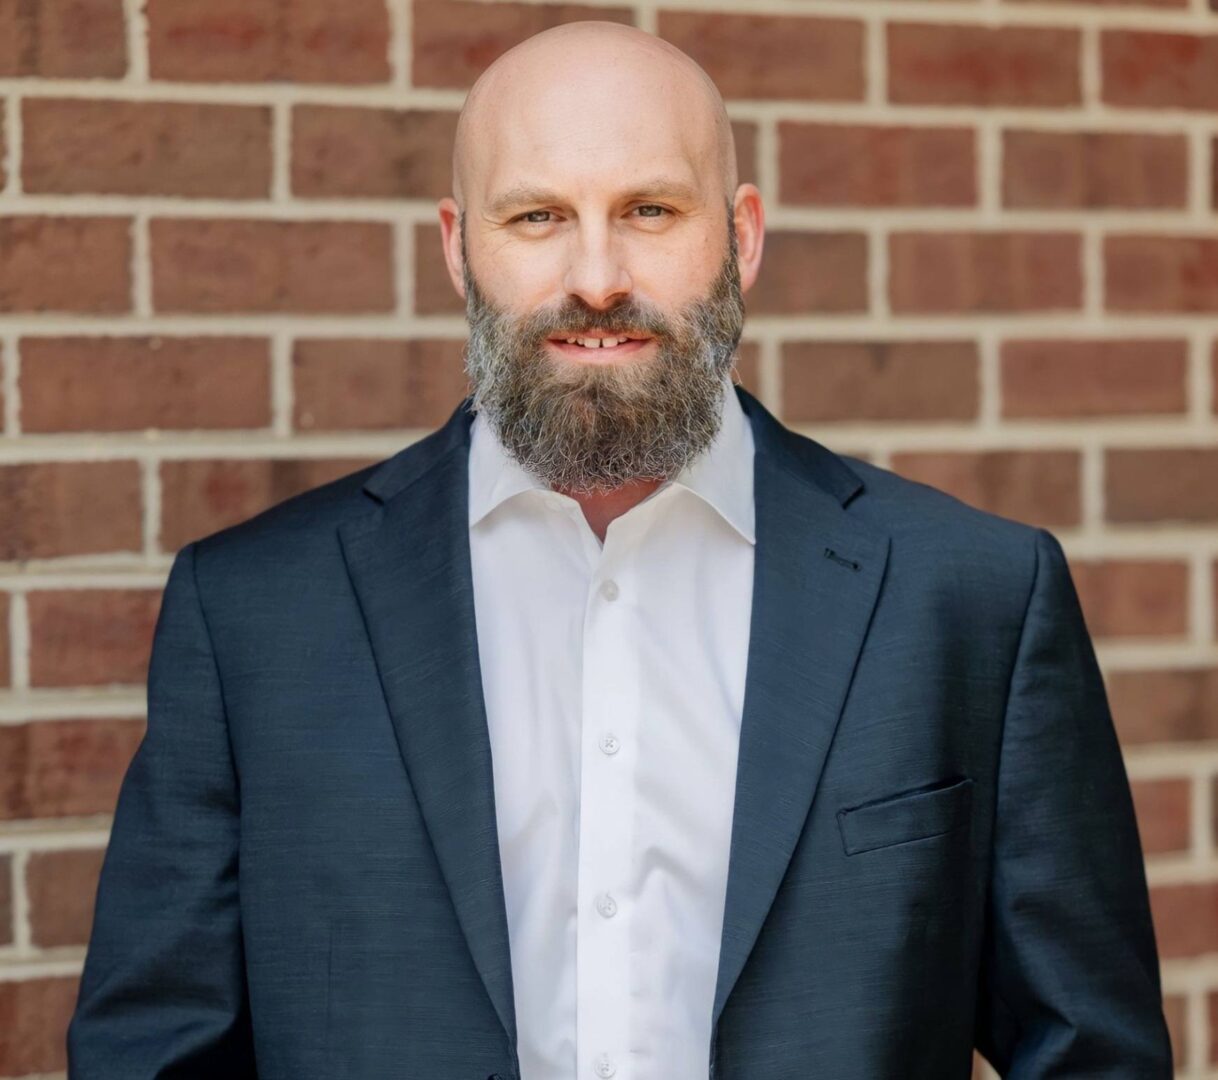 A bald man with a beard wearing a suit and tie.